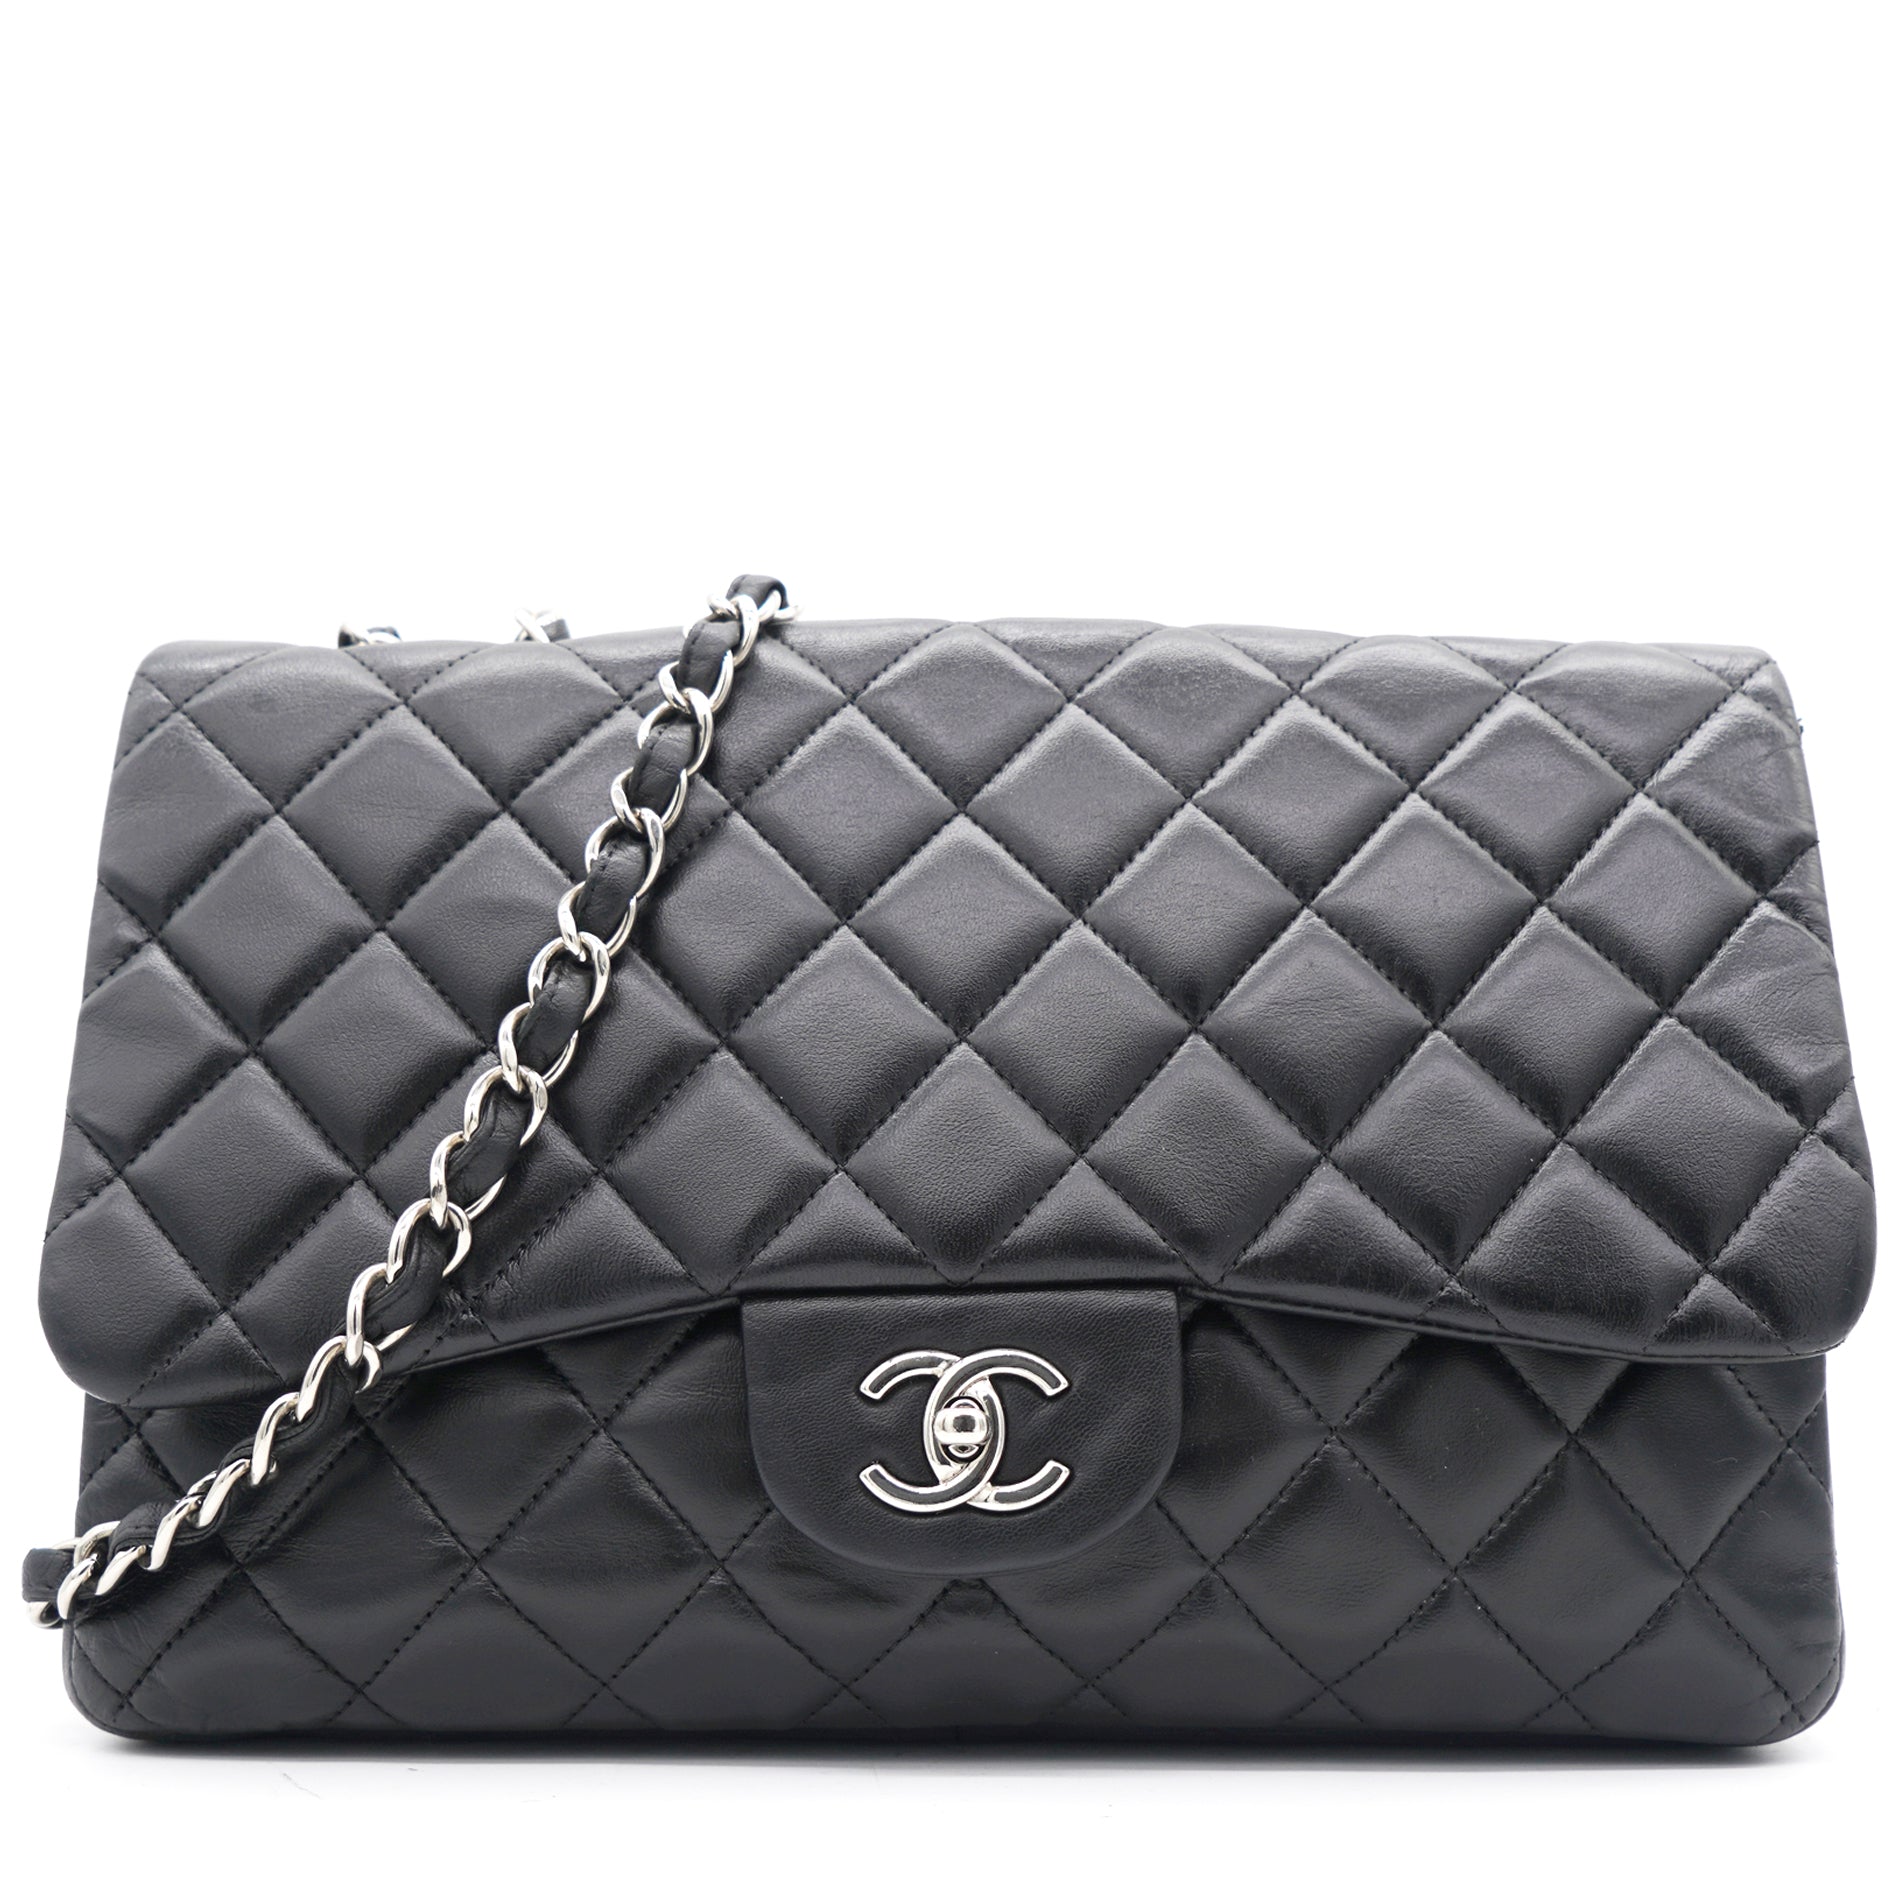 Chanel Pink Lambskin Leather Classic Medium Double Flap Bag   Shop giày  Swagger